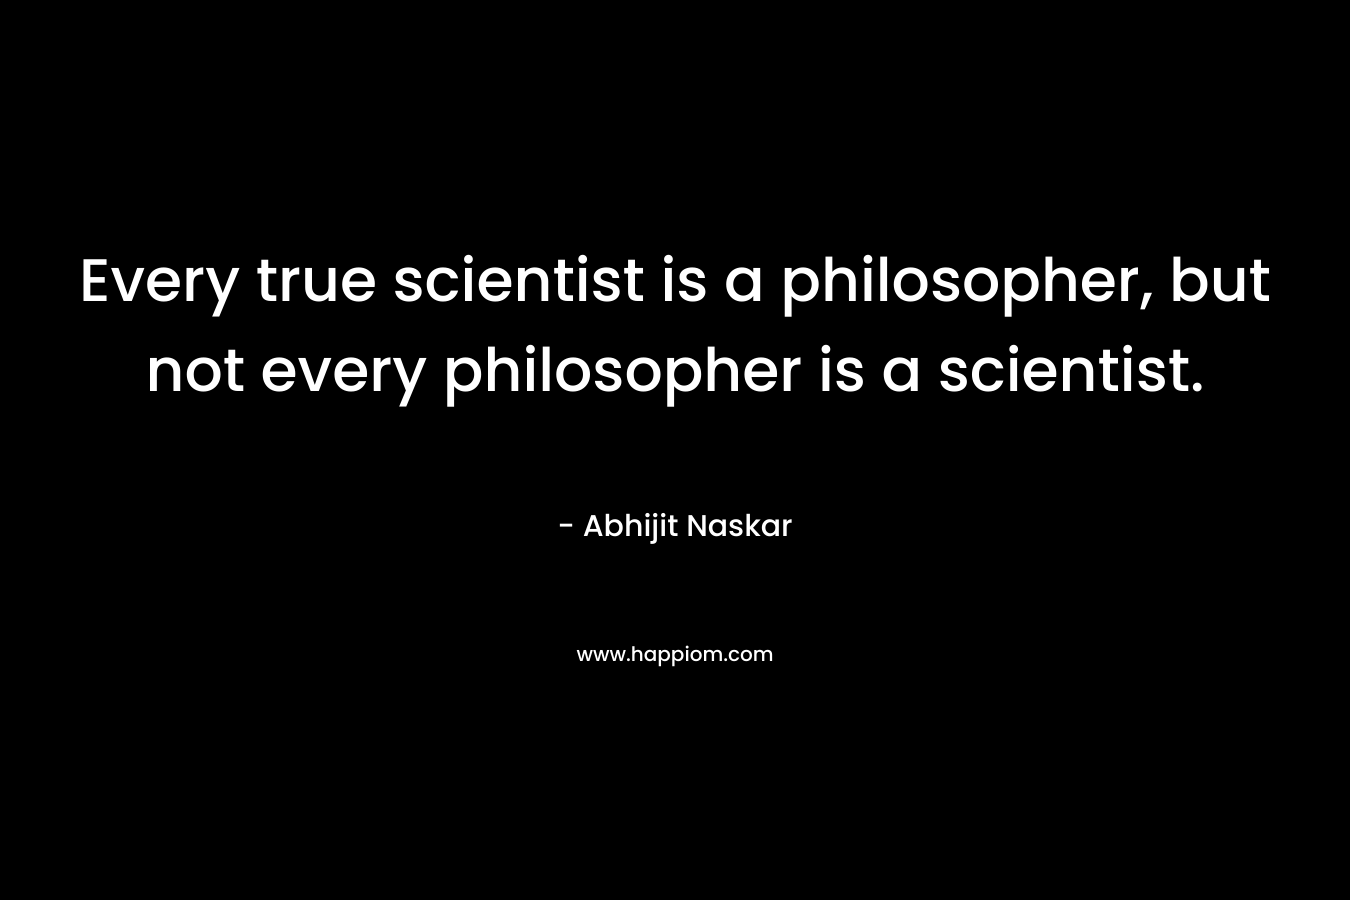 Every true scientist is a philosopher, but not every philosopher is a scientist. – Abhijit Naskar